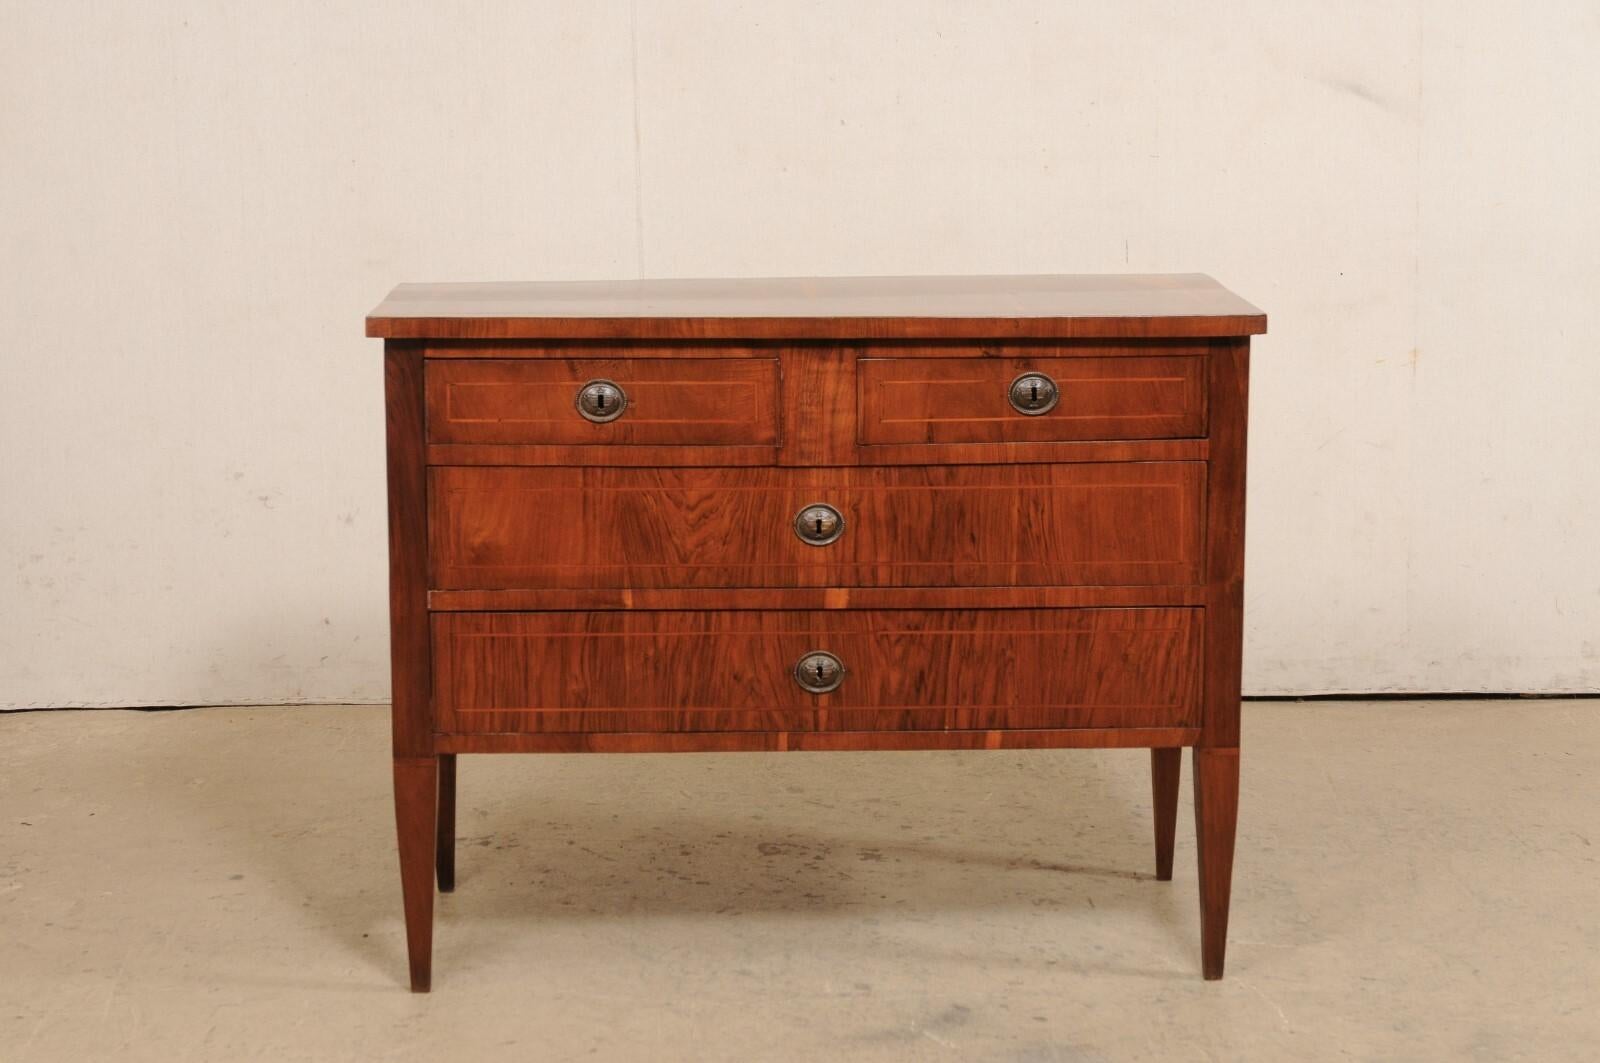 An Italian chest of four drawers from the early 19th century. This antique chest from Italy has been designed in nice clean lines, allowing the beautifully veneered wood grain and inlay banding to speak for the simple elegance of this piece. The